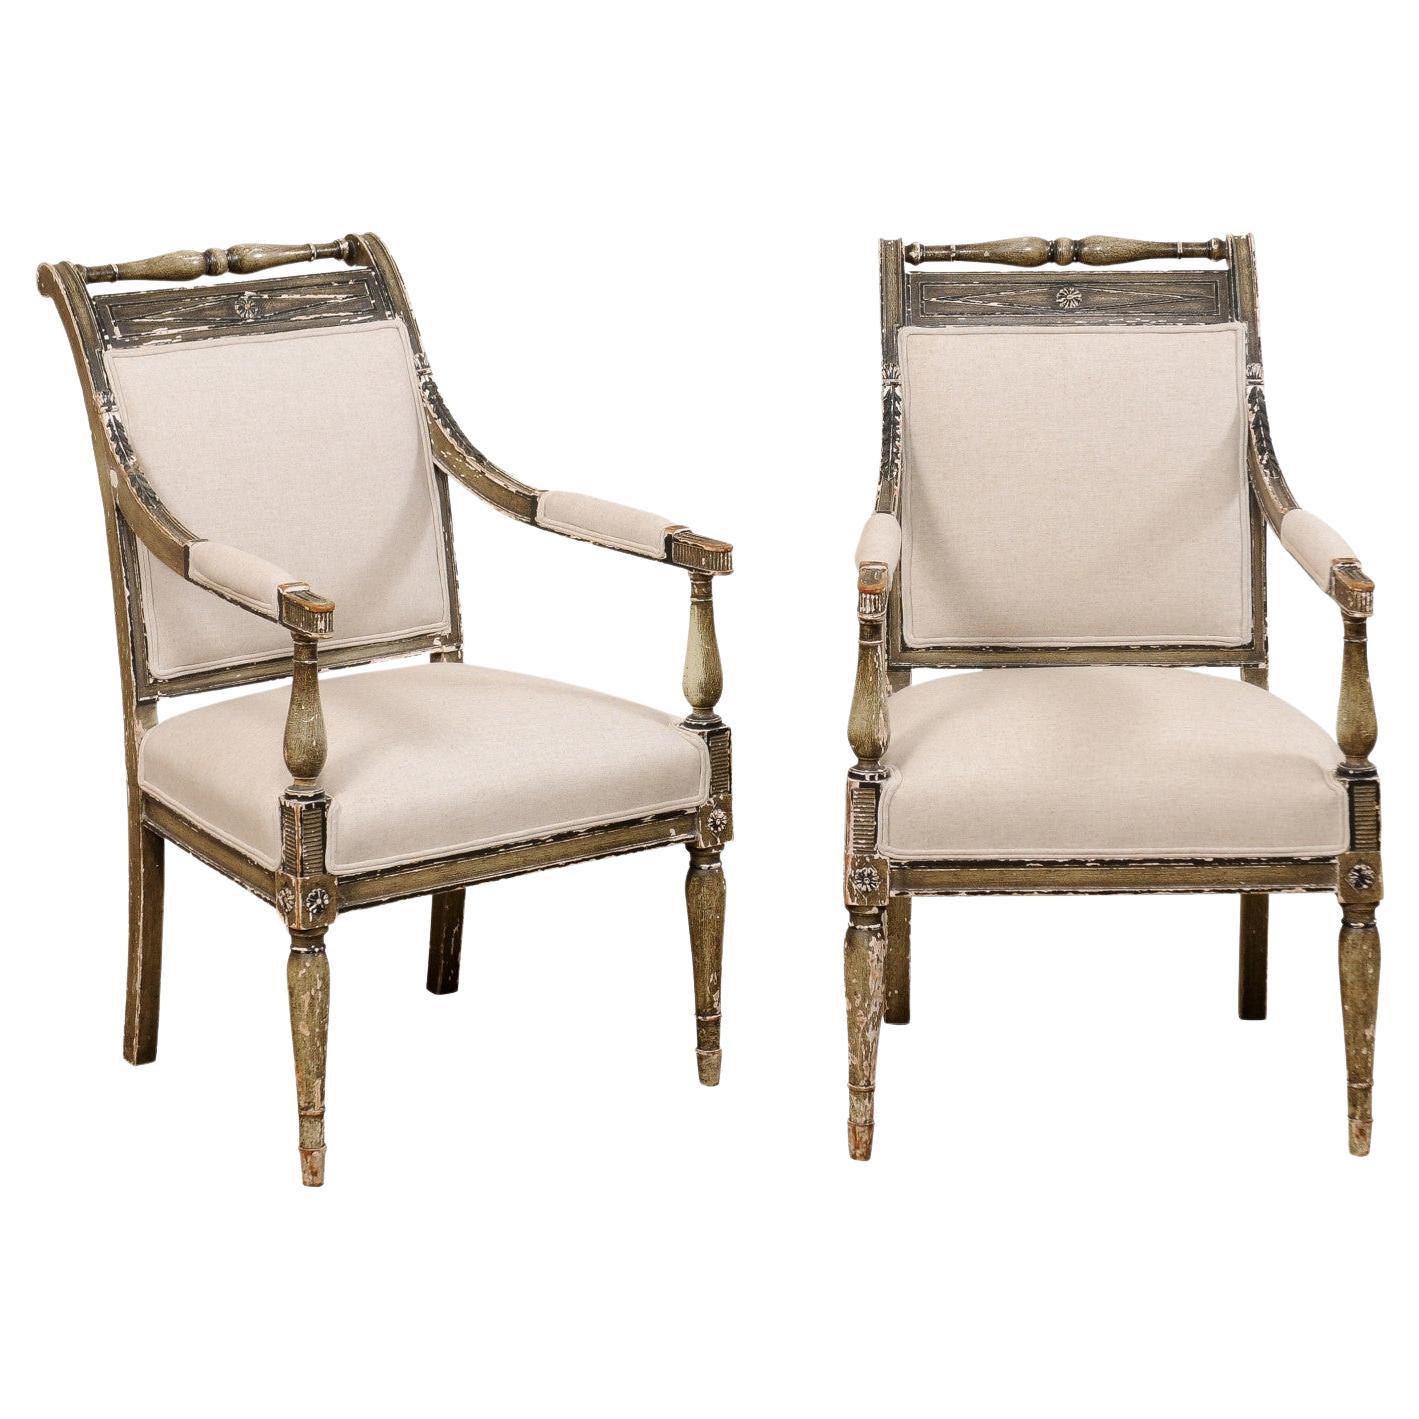 French Pair 19th C. Empire Style Fauteuils, Newly Upholstered in Belgian Linen For Sale